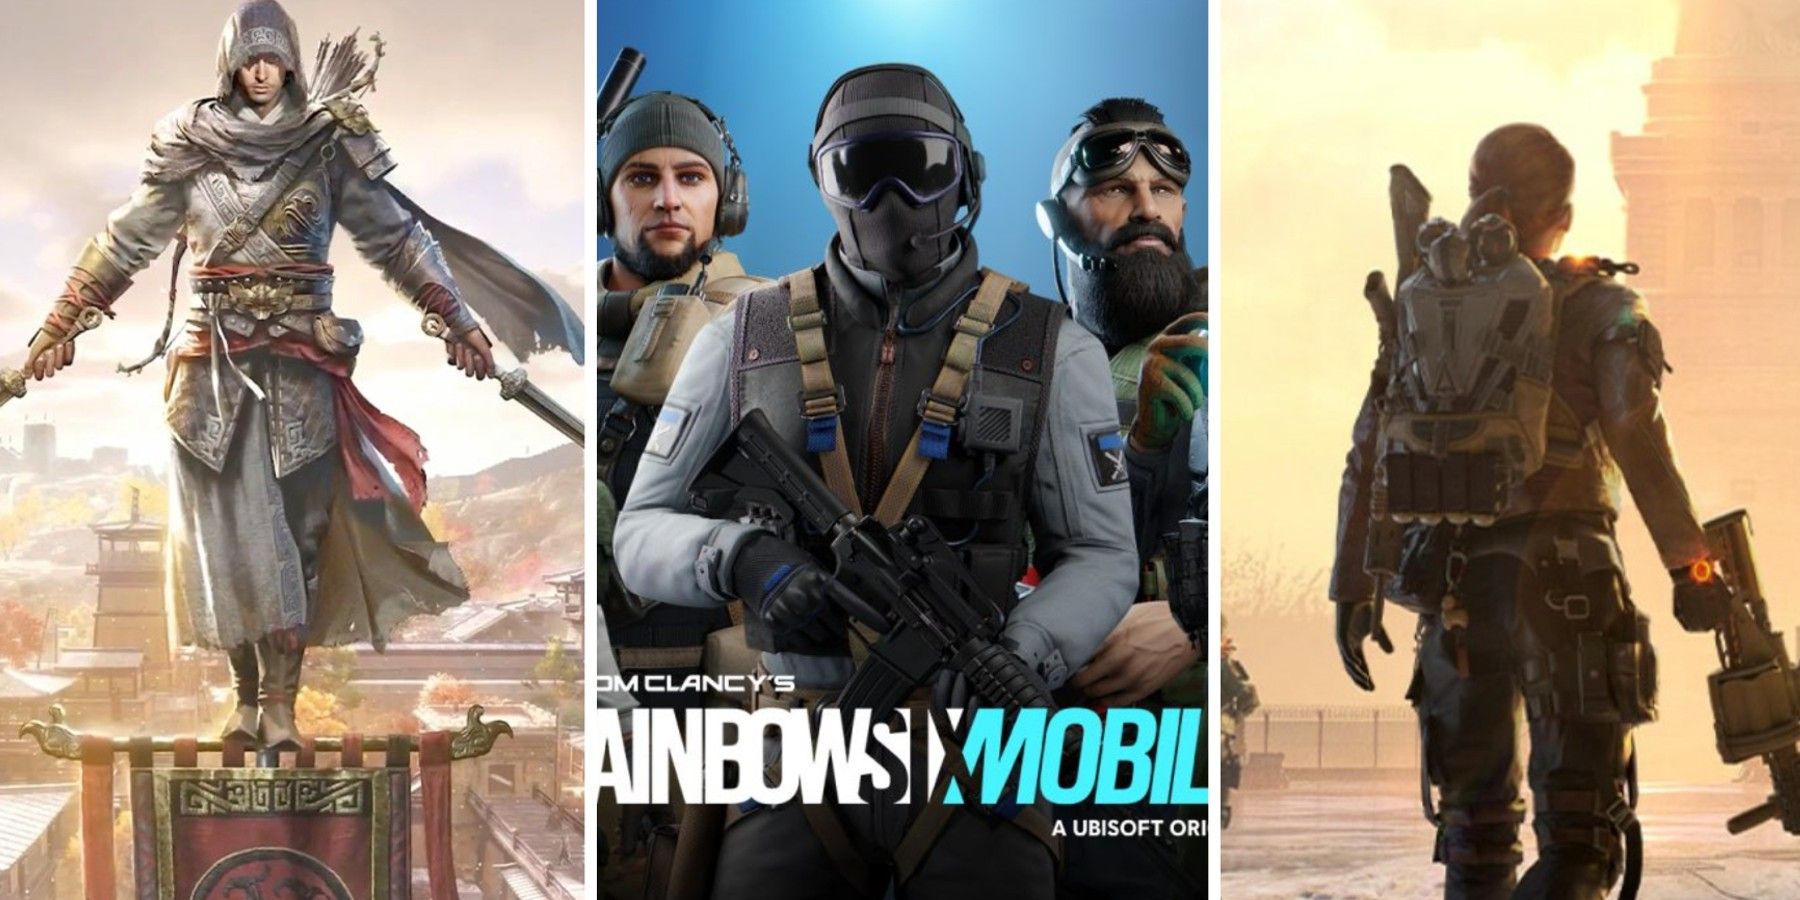 Ubisoft announces Rainbow Six Mobile is coming soon to Android, iOS